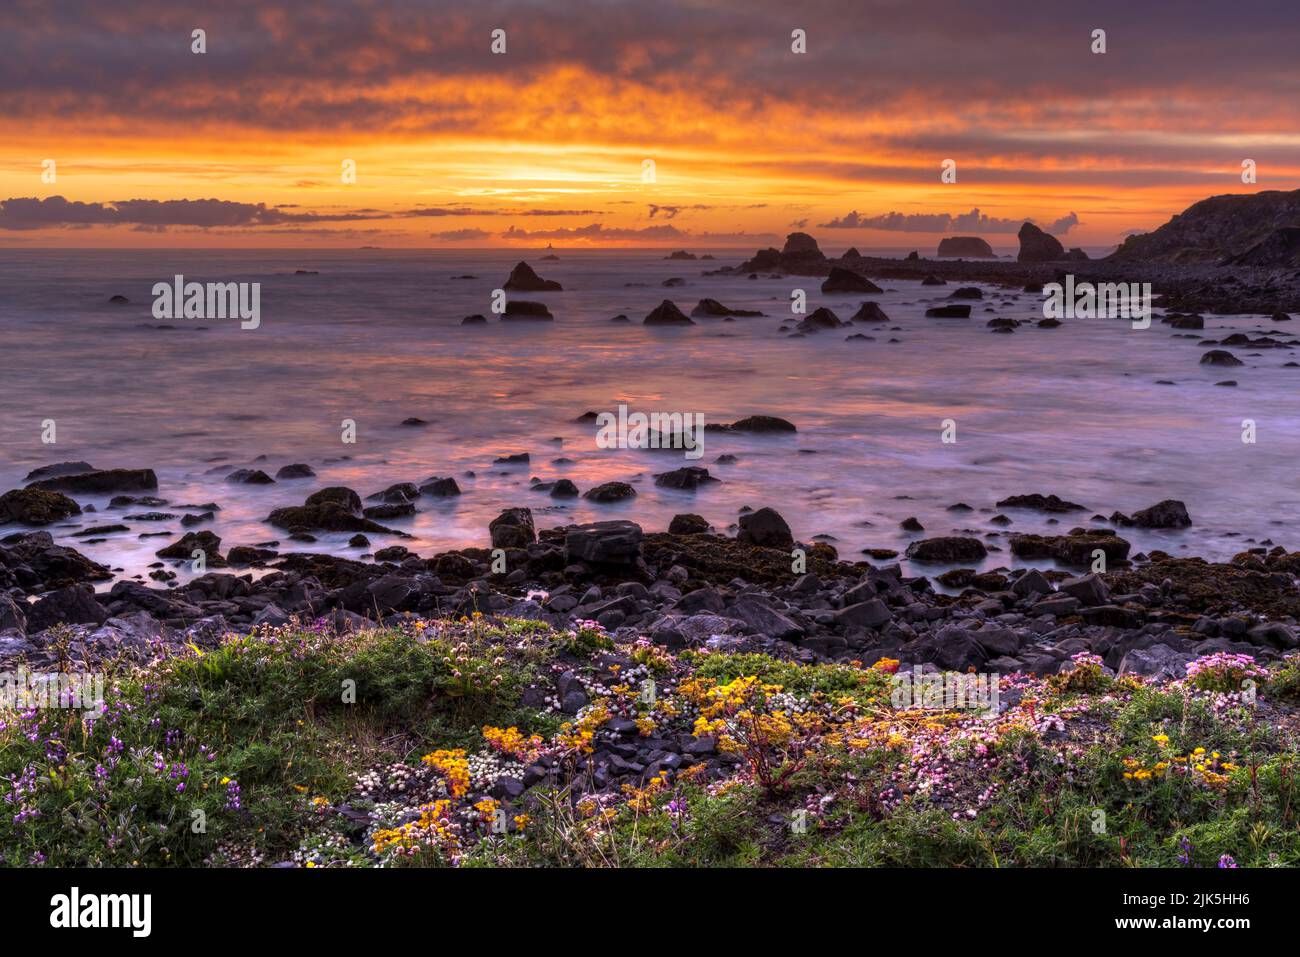 Colorful stonecrop flowers and sunset on the waters on the Pacific coast at St. Goerge Point, Crescent City, CA. Stock Photo